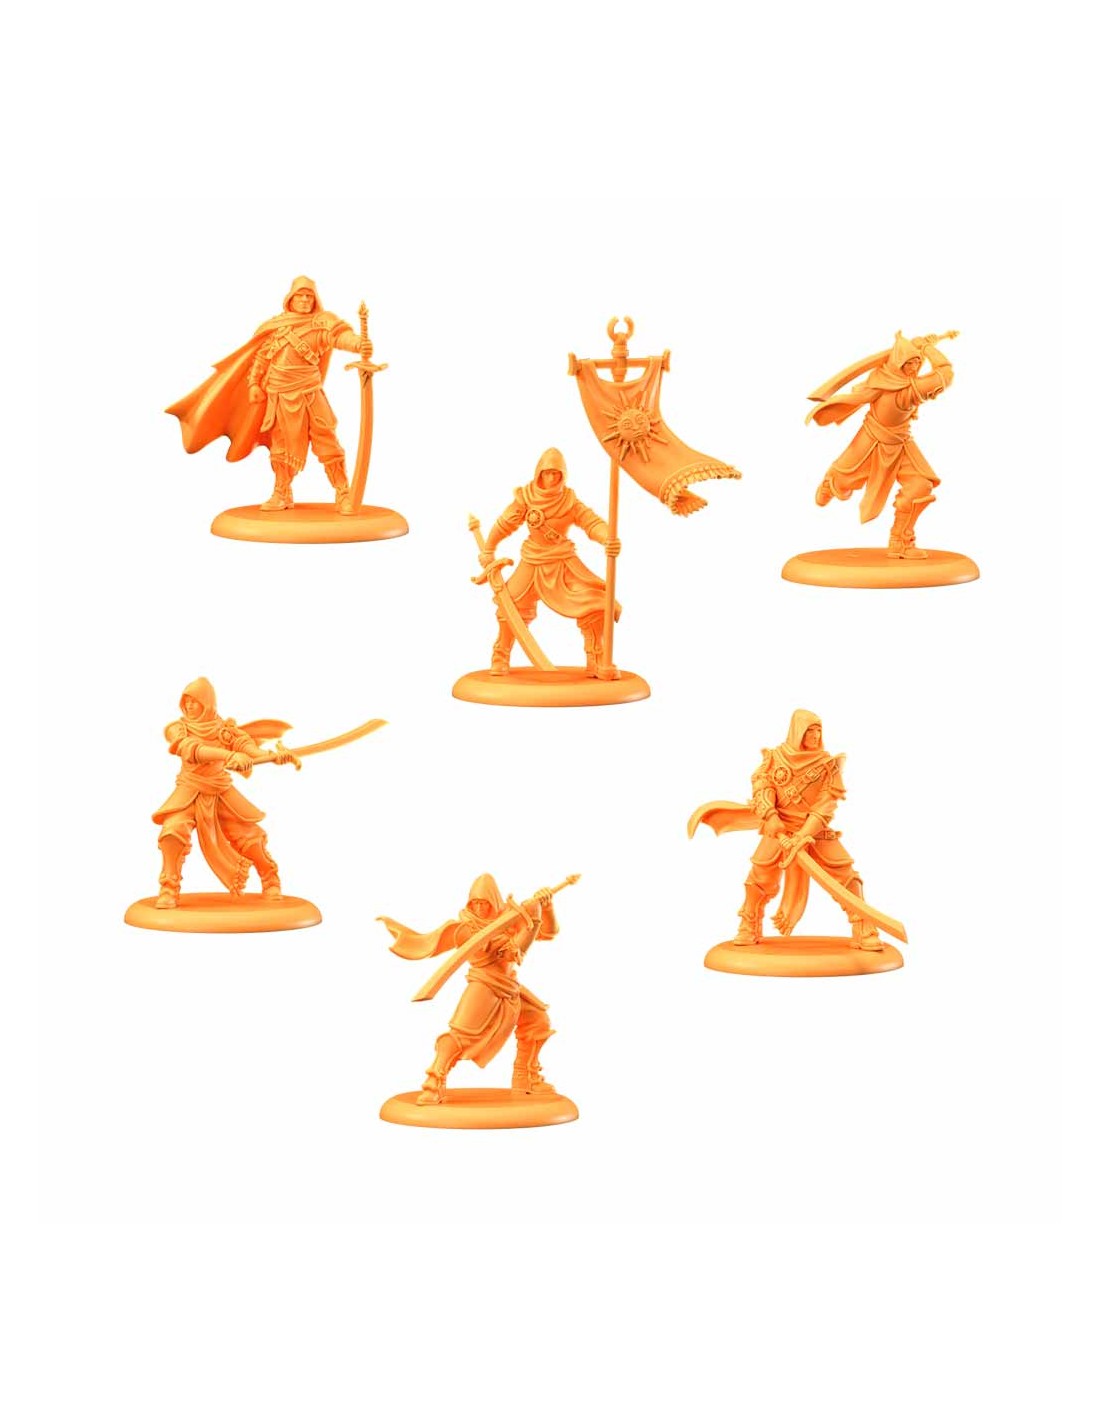 A Song of Ice & Fire: Darkstar's Retinue, Tabletop Miniatures